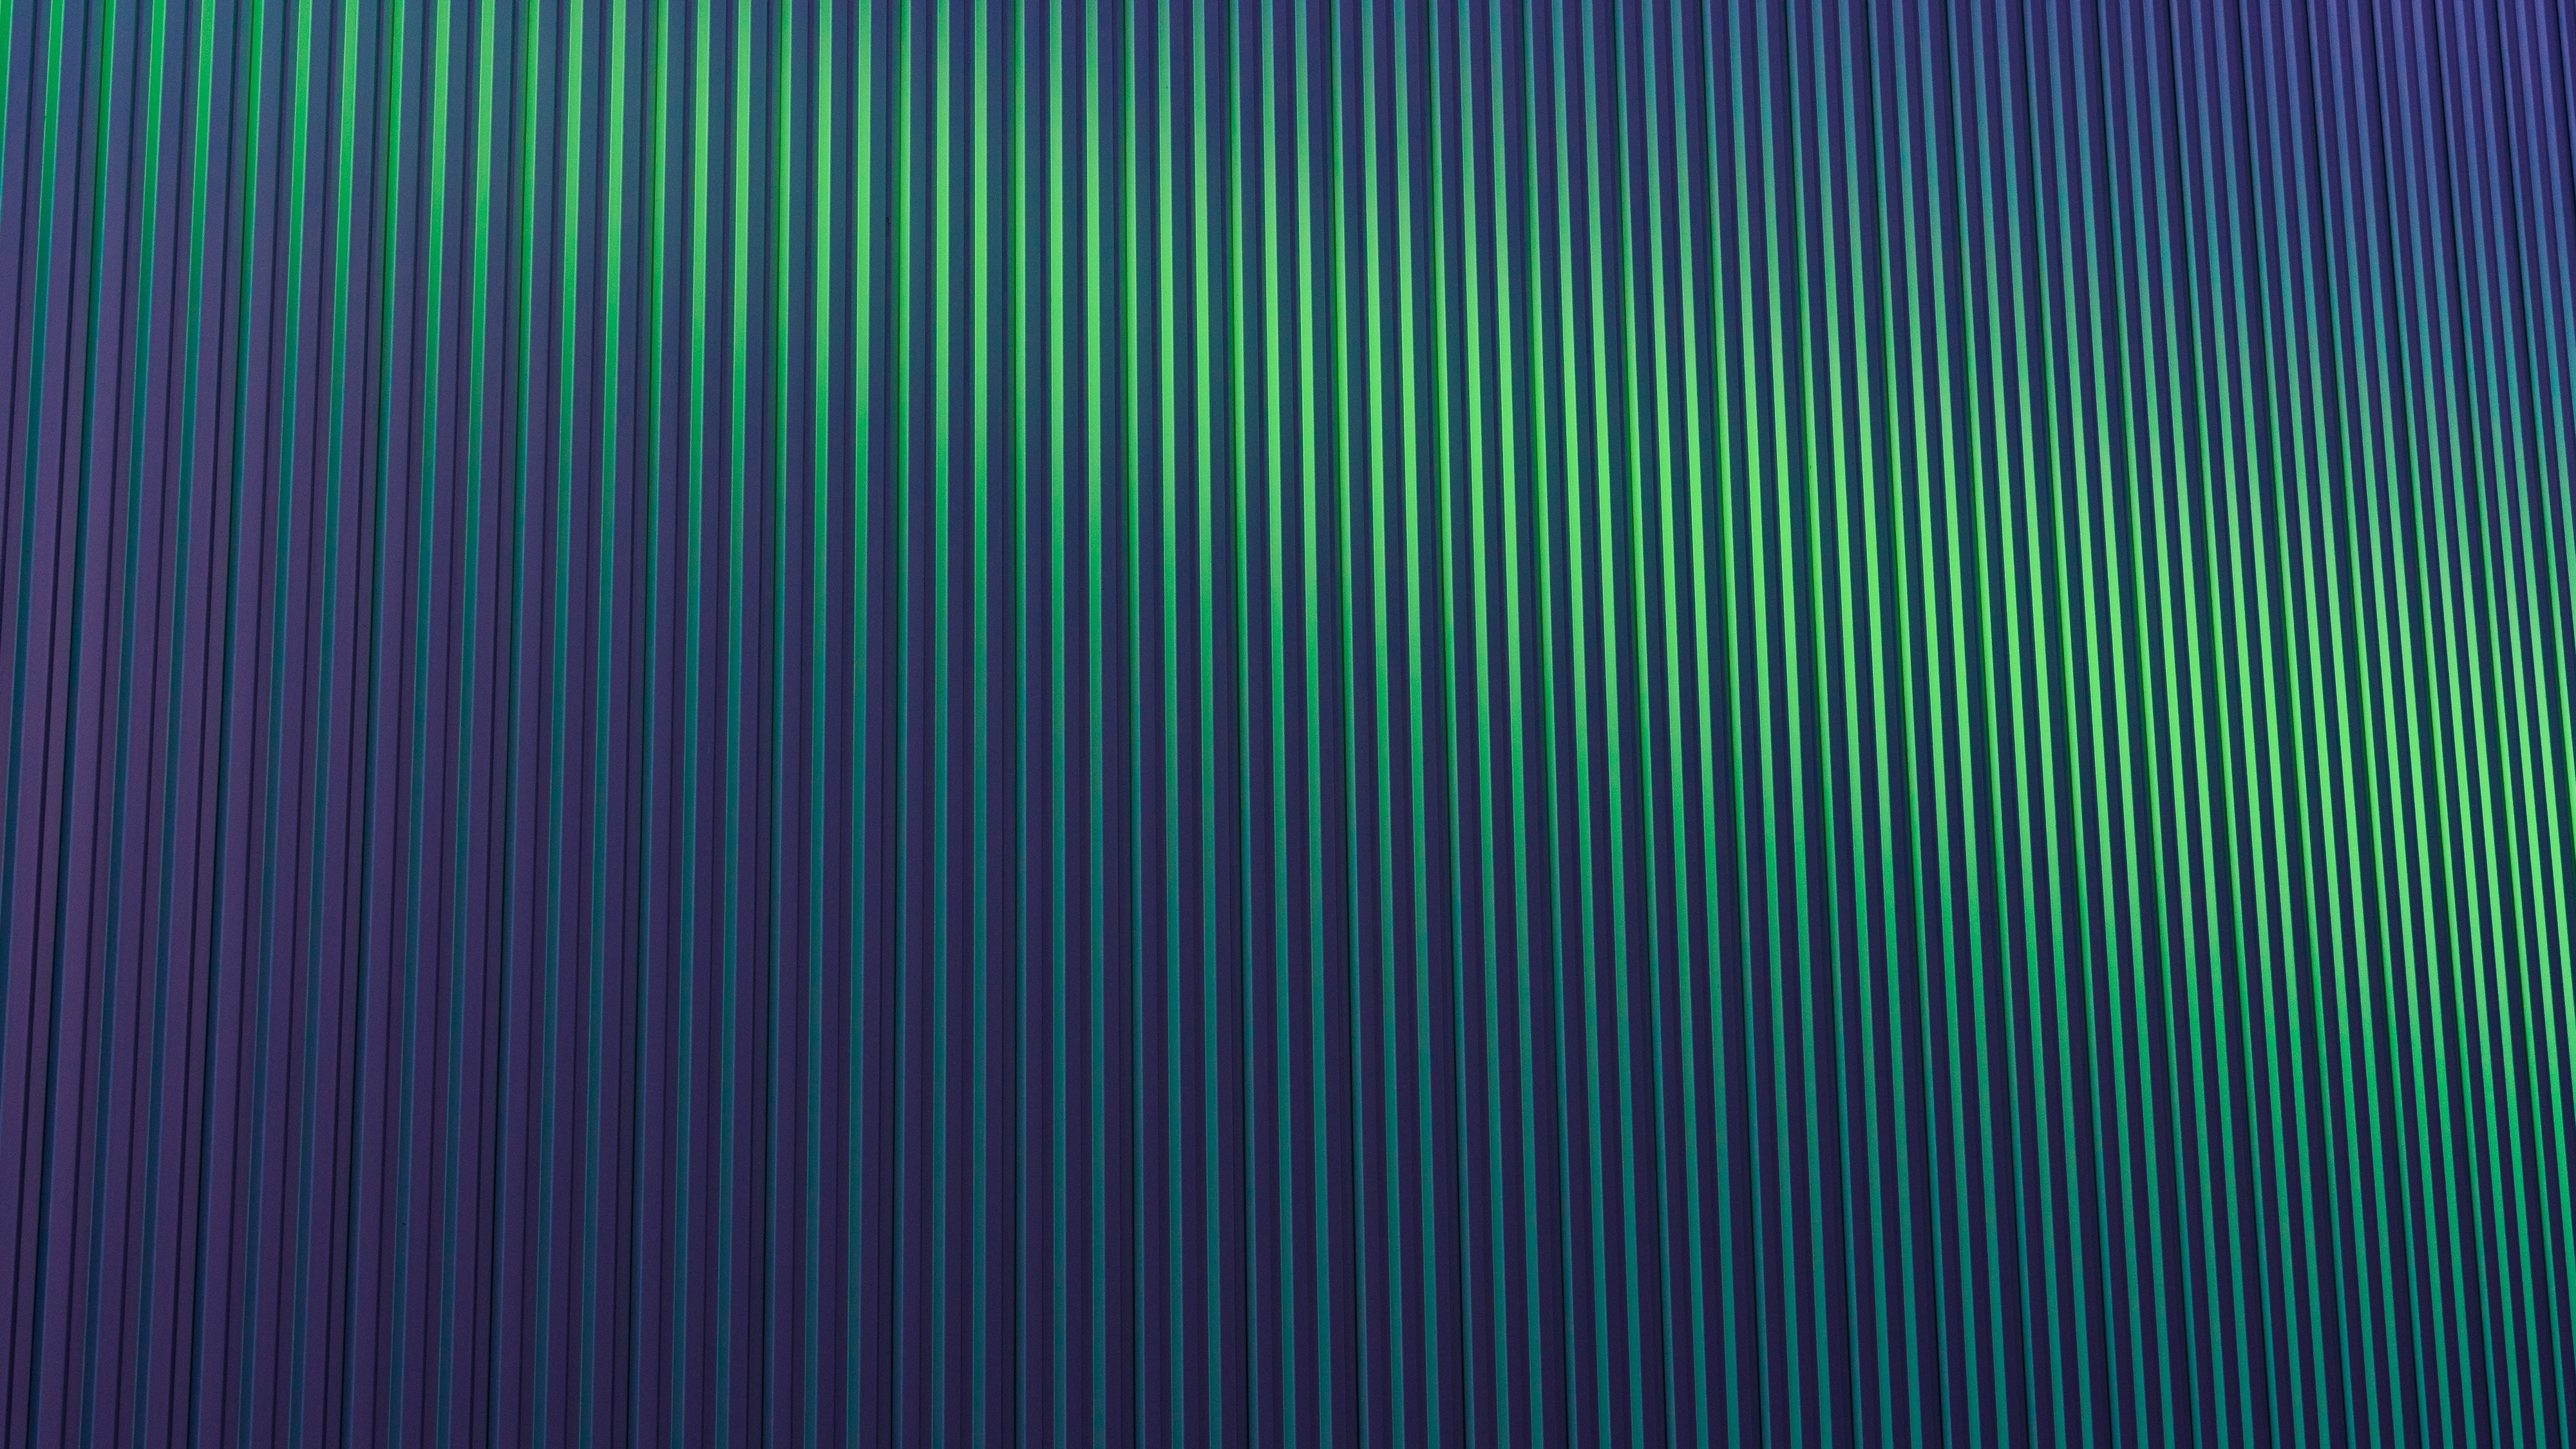 Green Vibrant Pattern Texture 4k Hd Abstract 4k Wallpapers Images